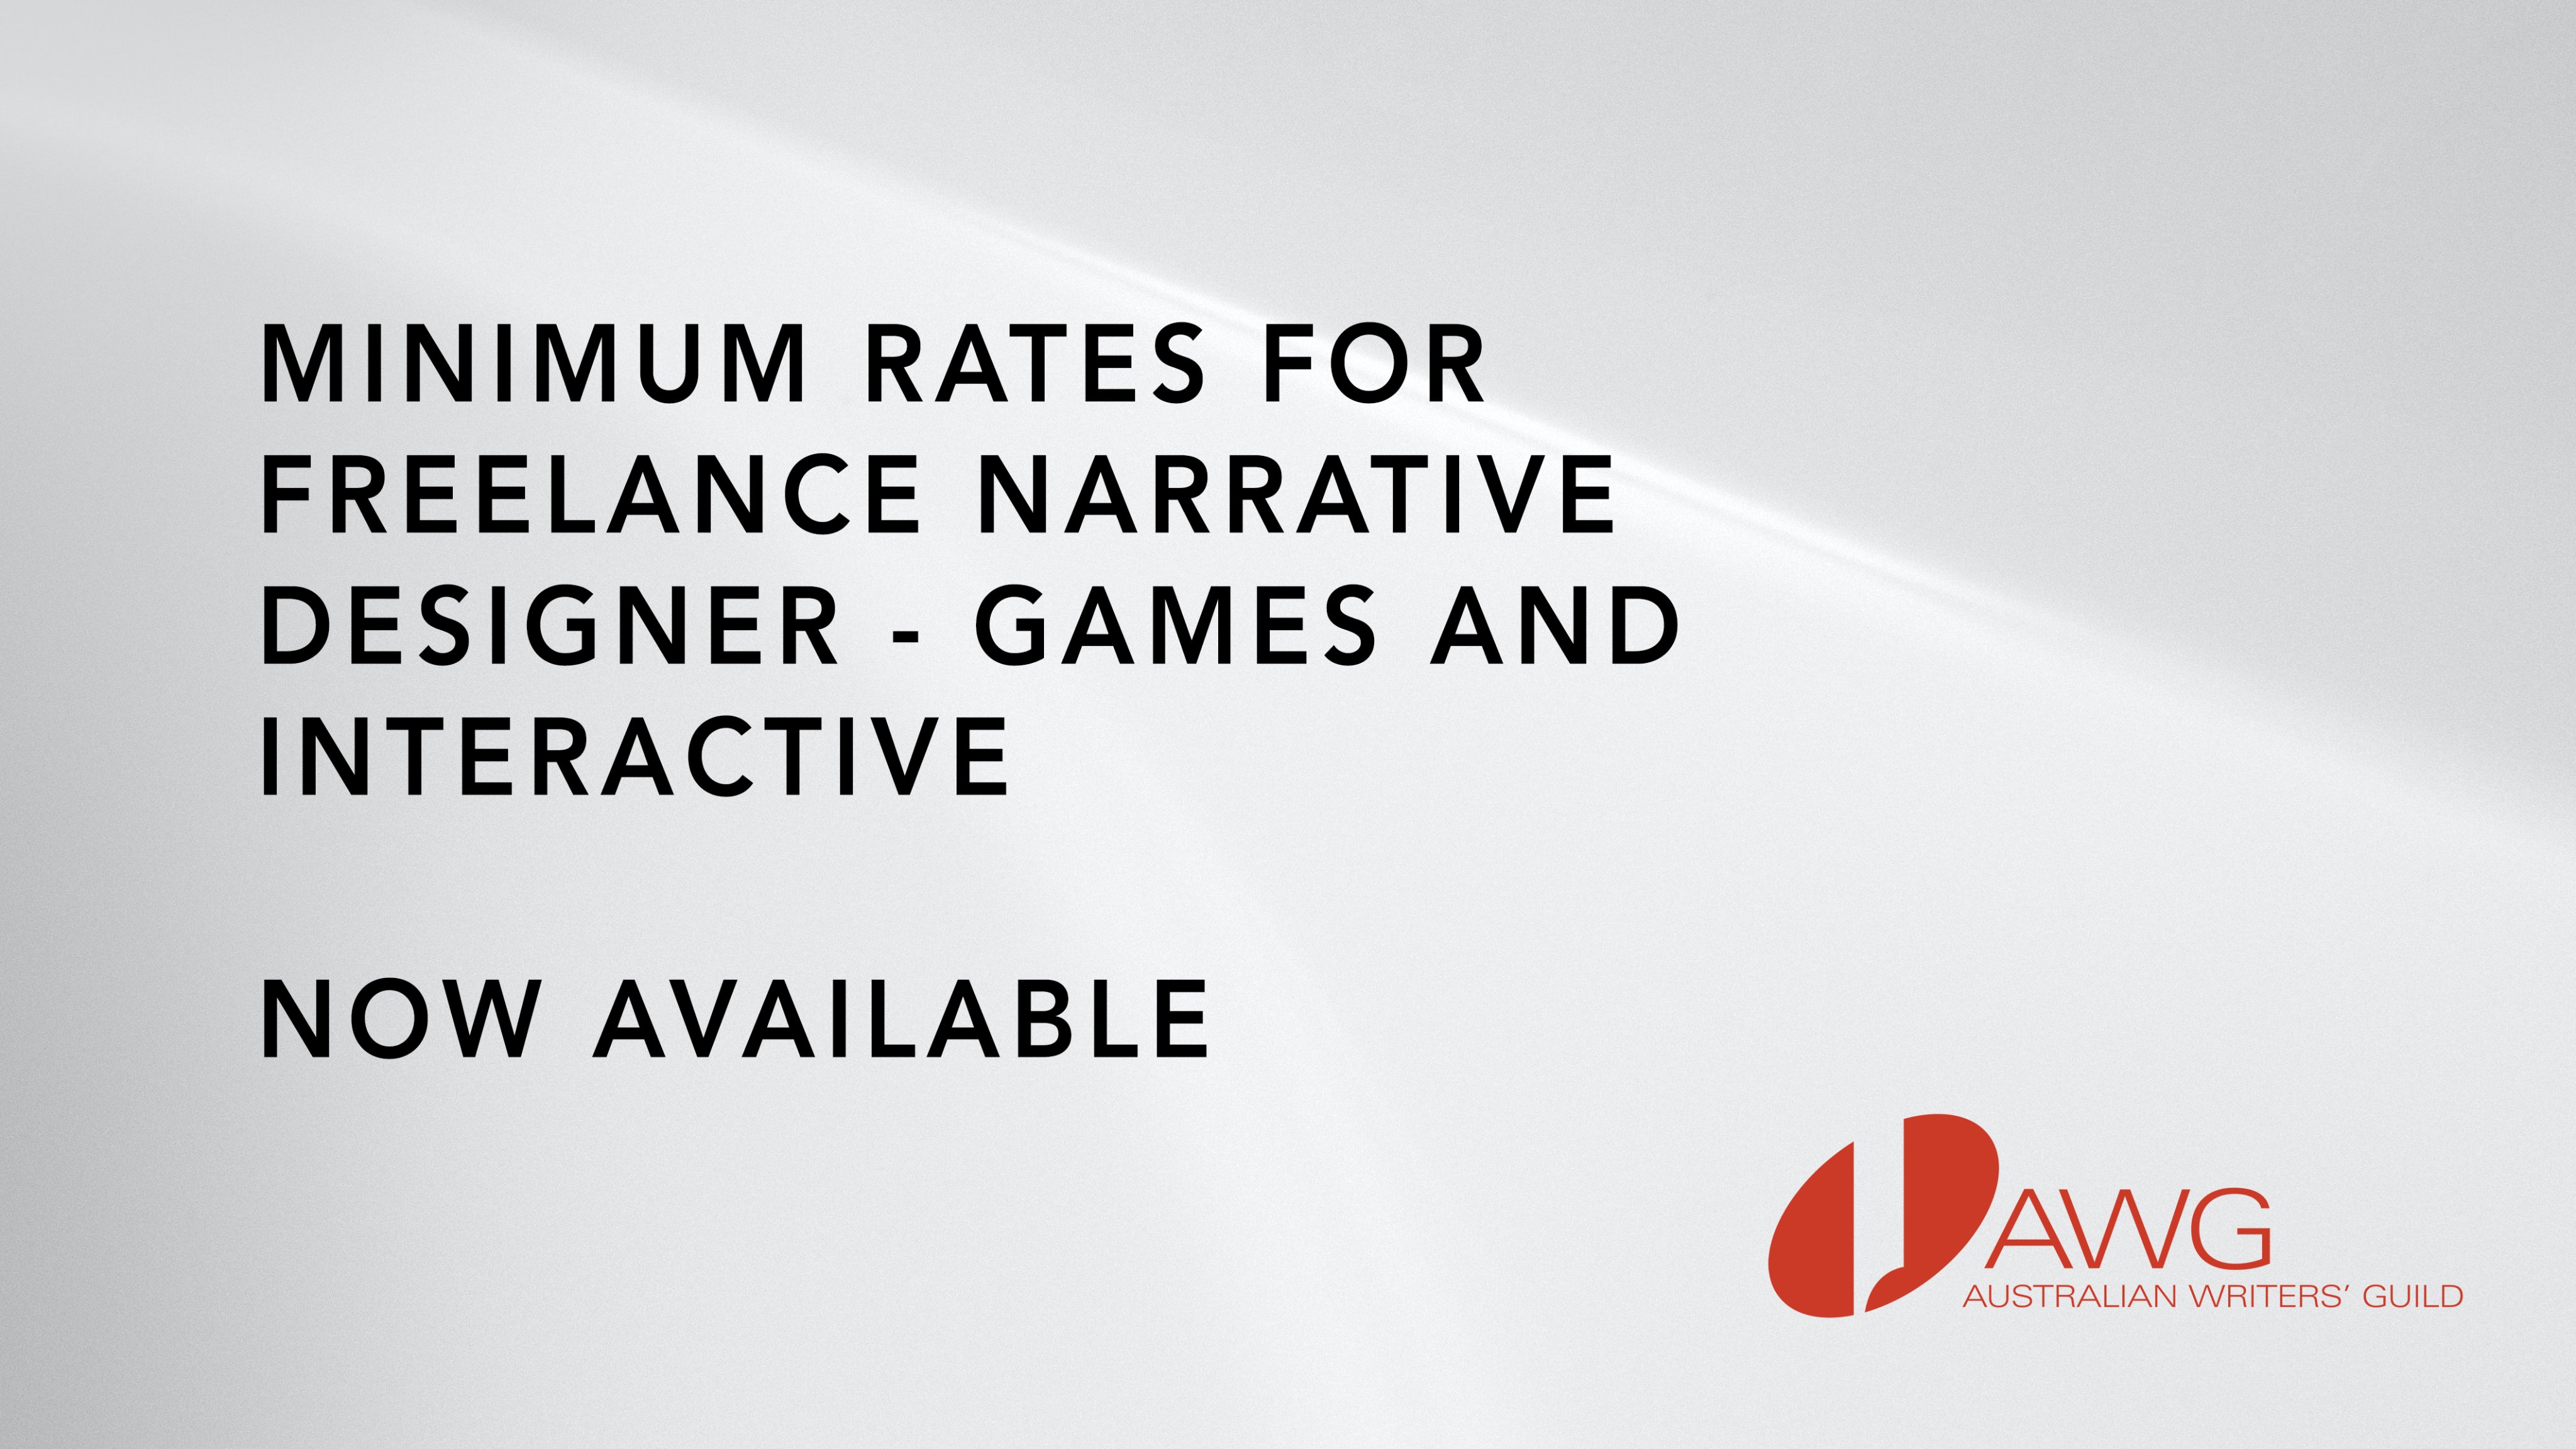 Melbourne Games Week on Twitter: all Narrative Designers! You now access information on minimum fees you can expect to be paid via the Australian Writers' Guild's (@AWG_1) new